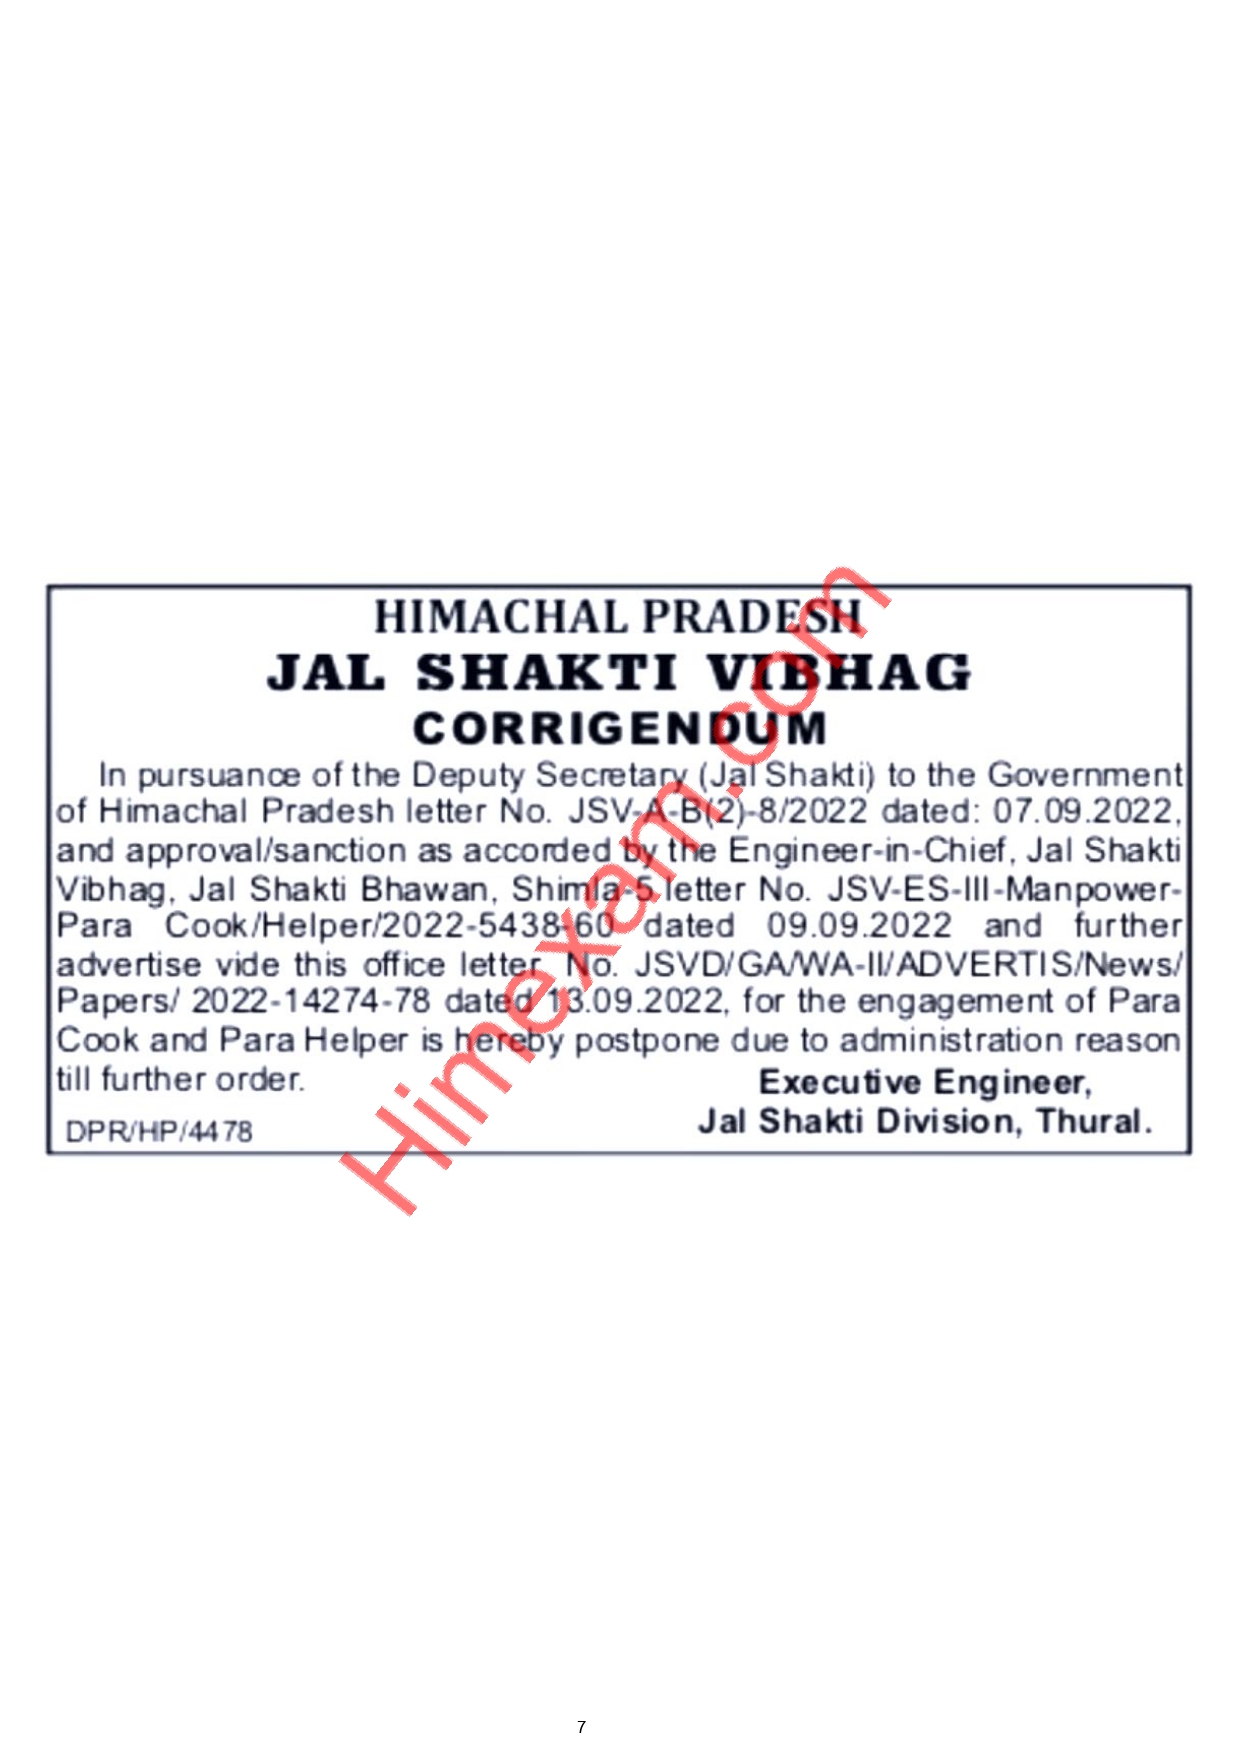 Important Notice For The Post of Para Cook & Para Helper :- Jal Shakti Division Thural